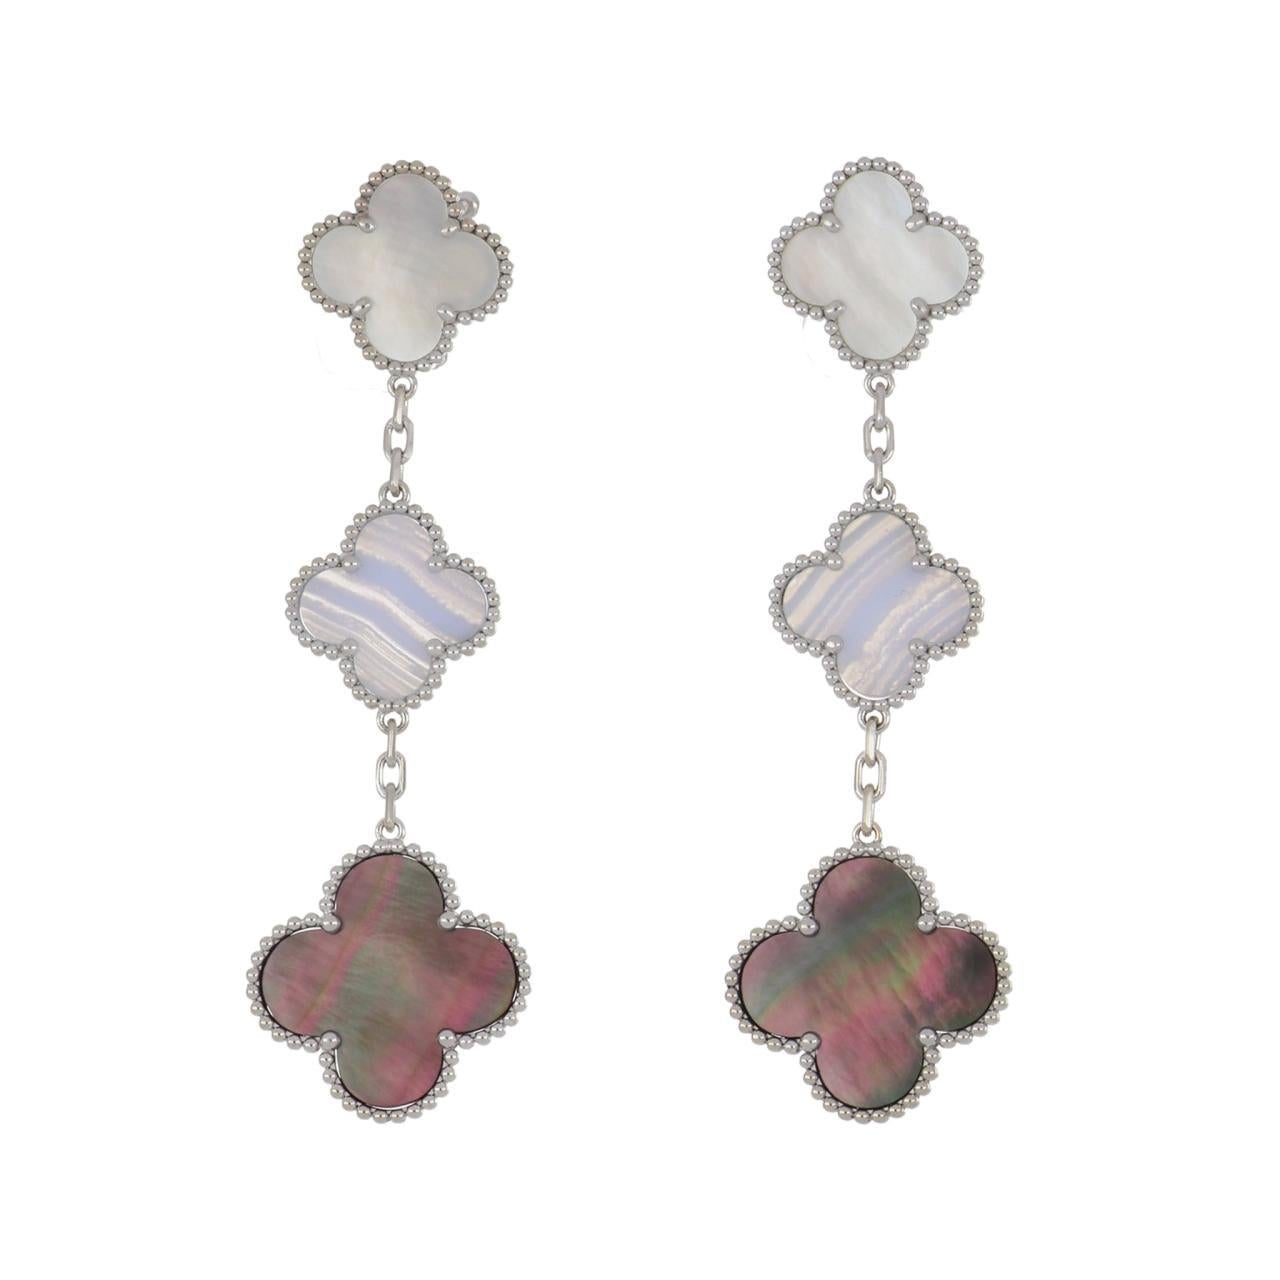 18k White Gold Magic Chalcedony And Mother Of Pearl Alhambra Long 3 Motifs Earrings by Van Cleef & Arpels.
With 2x motifs Grey Mother of Pearl - 20mm each.
2x motifs Chalcedony - 14.5mm each
2x motifs White Mother of Pearl - 14.5mm each.
These